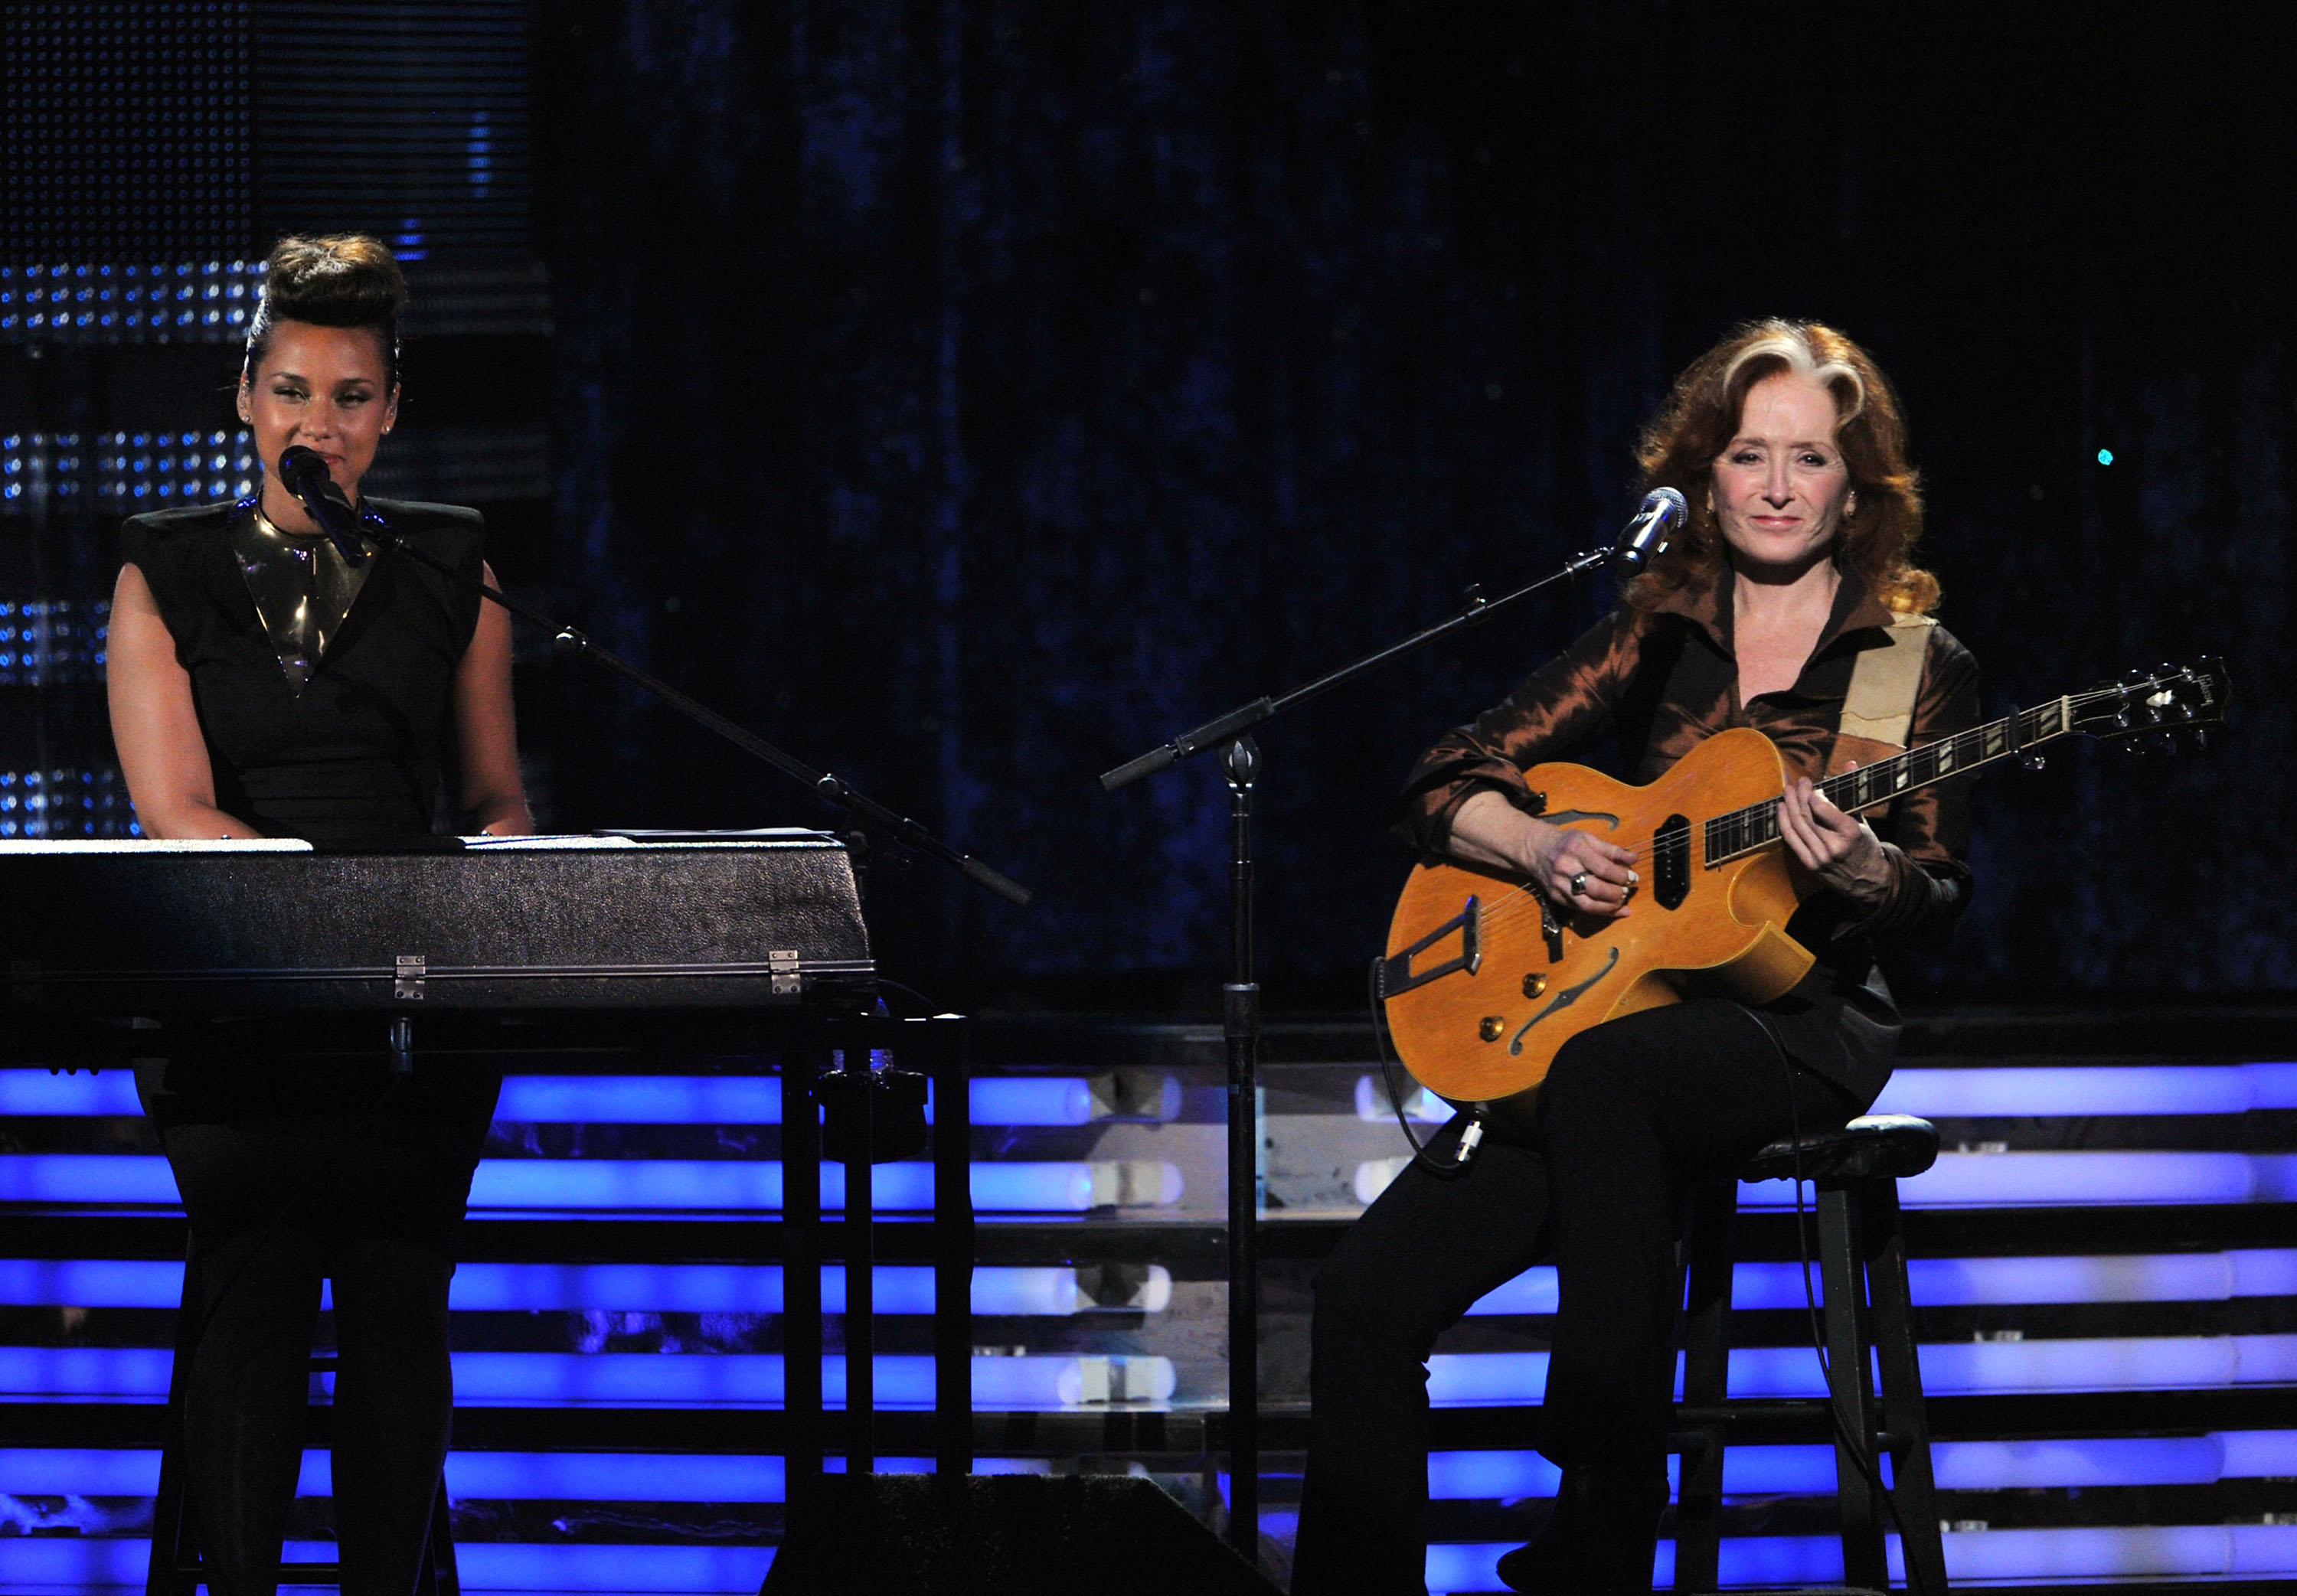 Musicians Alicia Keys and Bonnie Raitt perform onstage at the 54th Annual GRAMMY Awards held at Staples Center on February 12, 2012 in Los Angeles, California.  (credit: Getty Images)